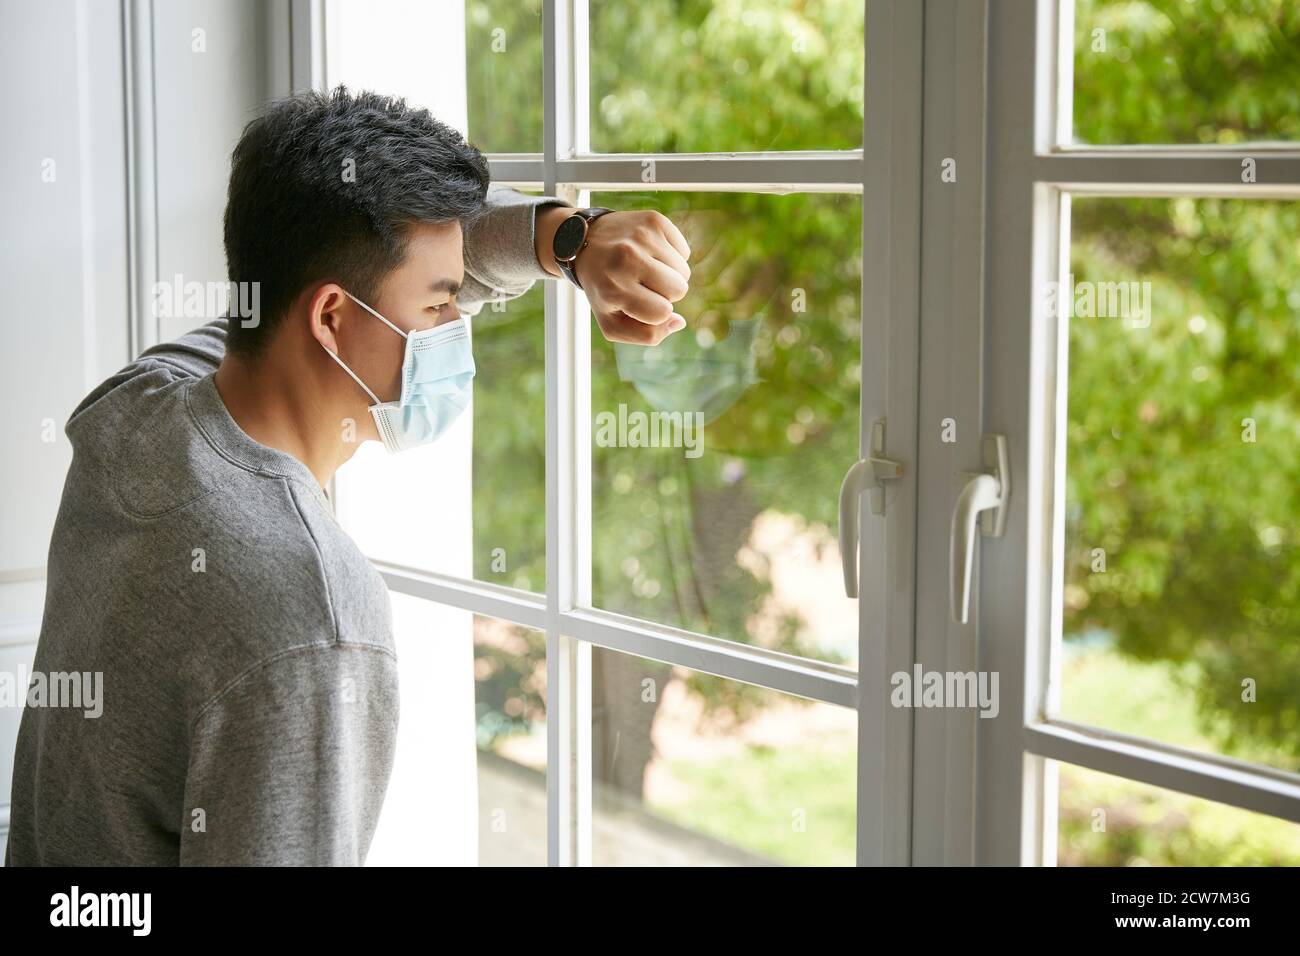 young asian man leaning against window looking at trees outside Stock Photo